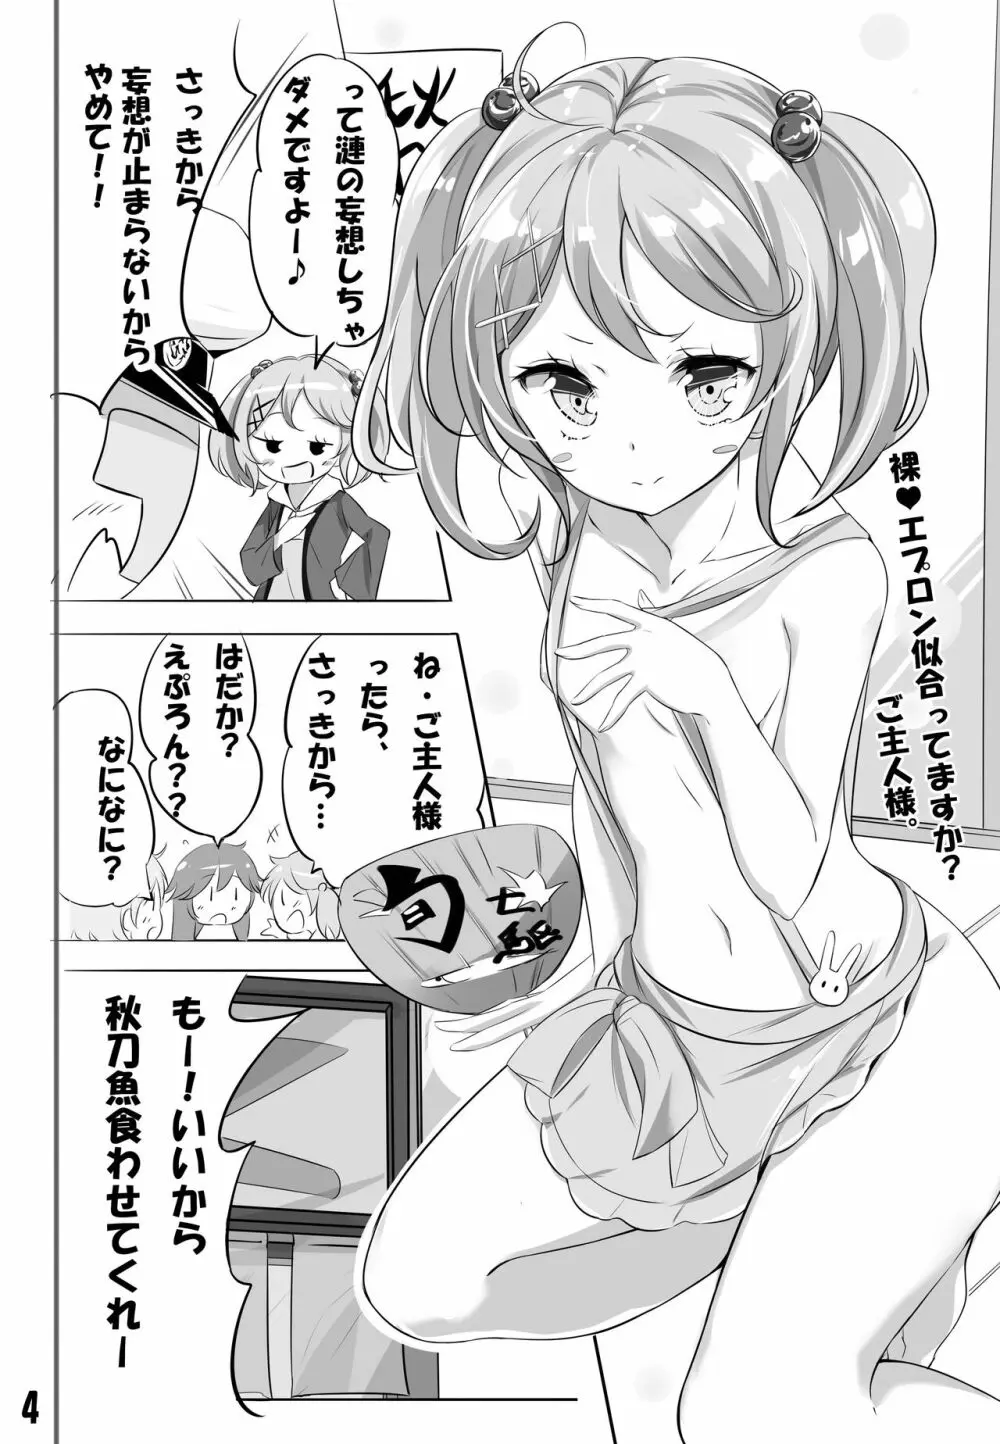 hamaken collection 総集編vol 9～12 プラス 七駆の乳くらべ Page.71